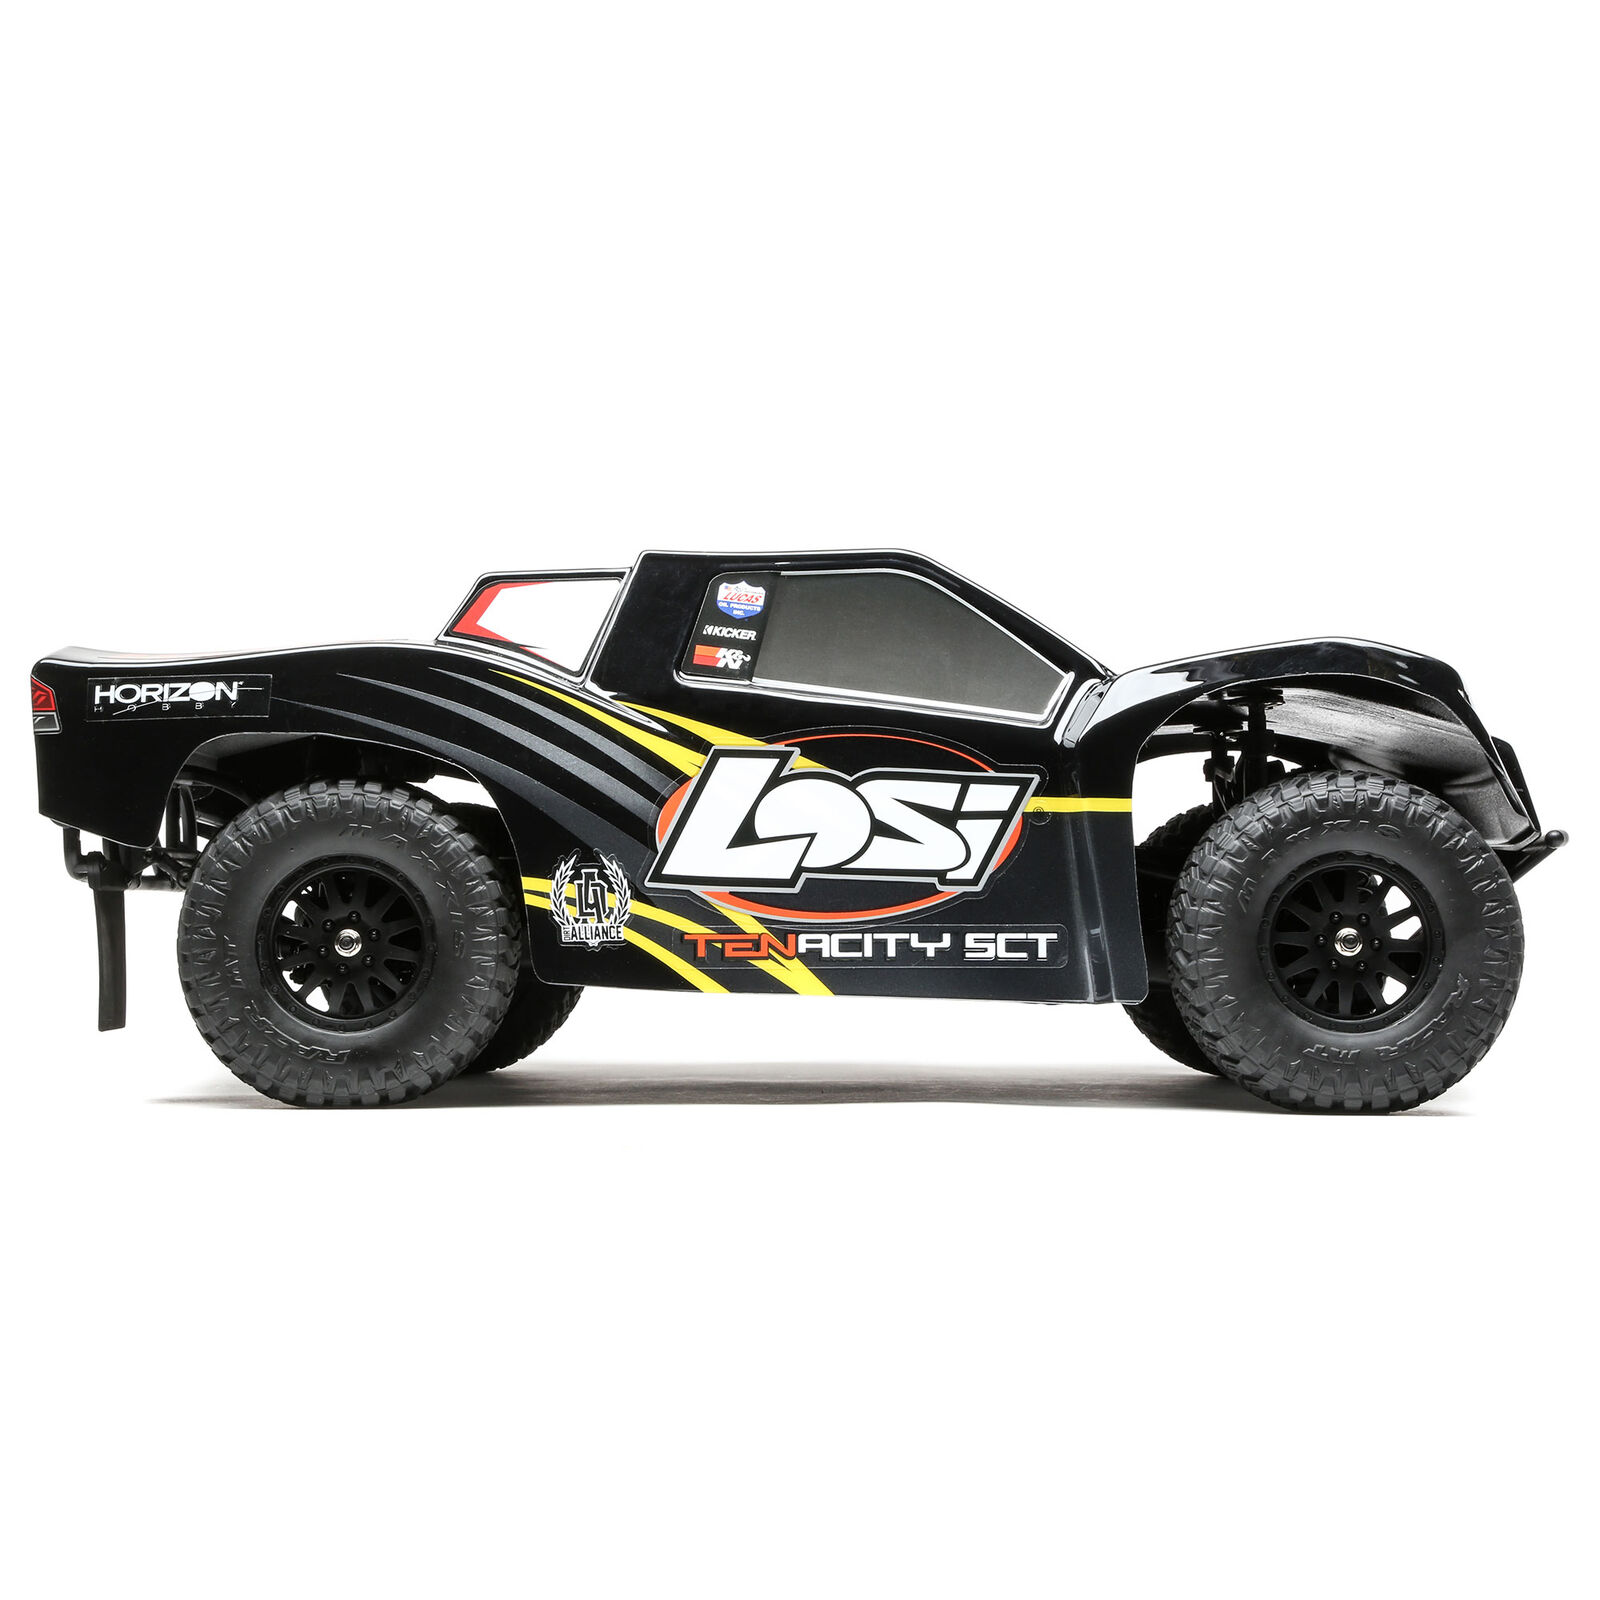 SPRINT 1:10 Scale RC Car 20+ MPH - Brushed - Black/Yellow